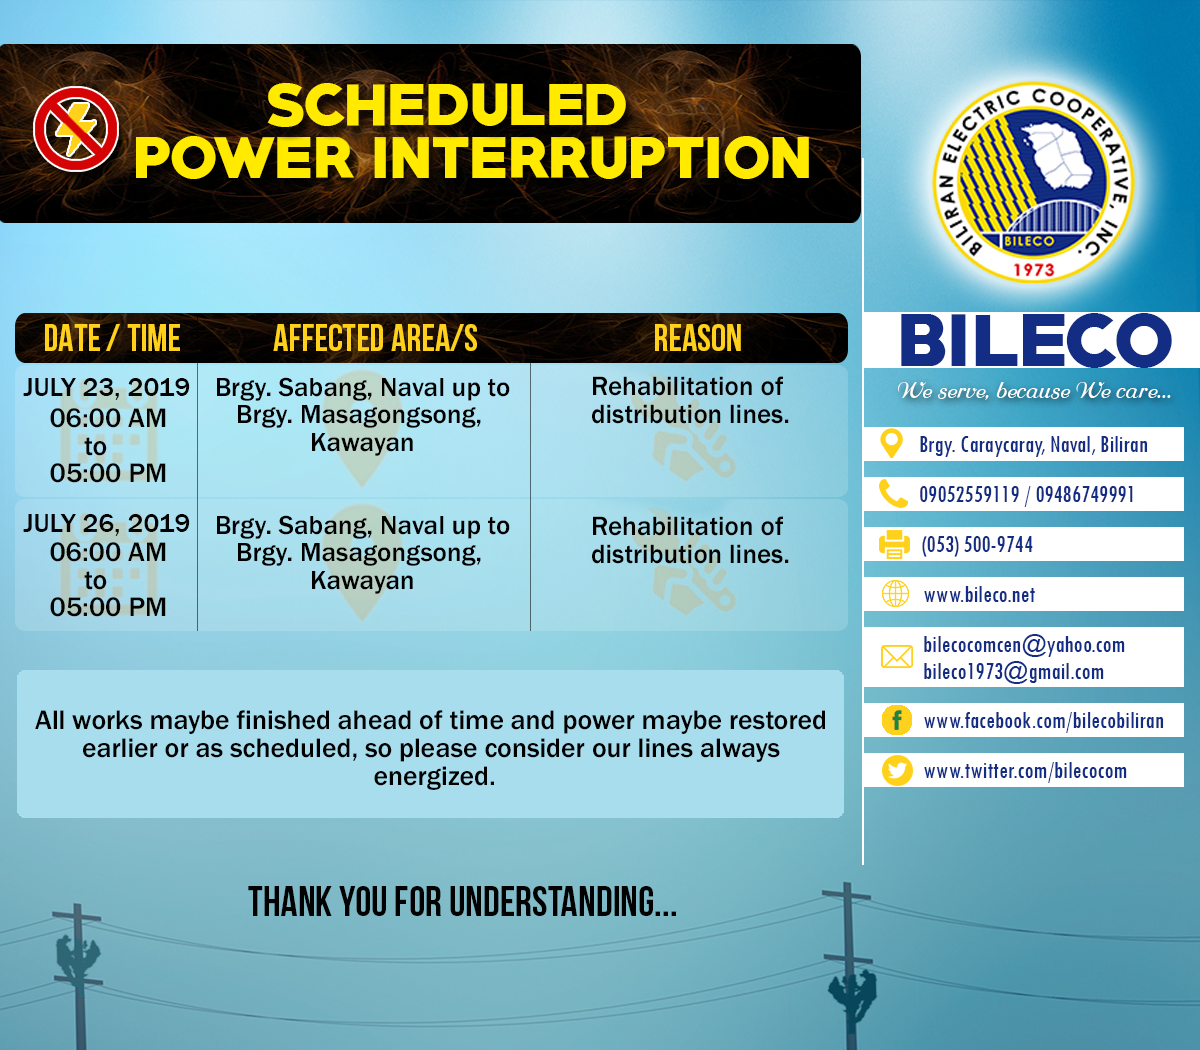 You are currently viewing Scheduled Power Interruption in AREA 1 (Naval Area) and AREA 3 (Almeria, Culaba & Kawayan Area)